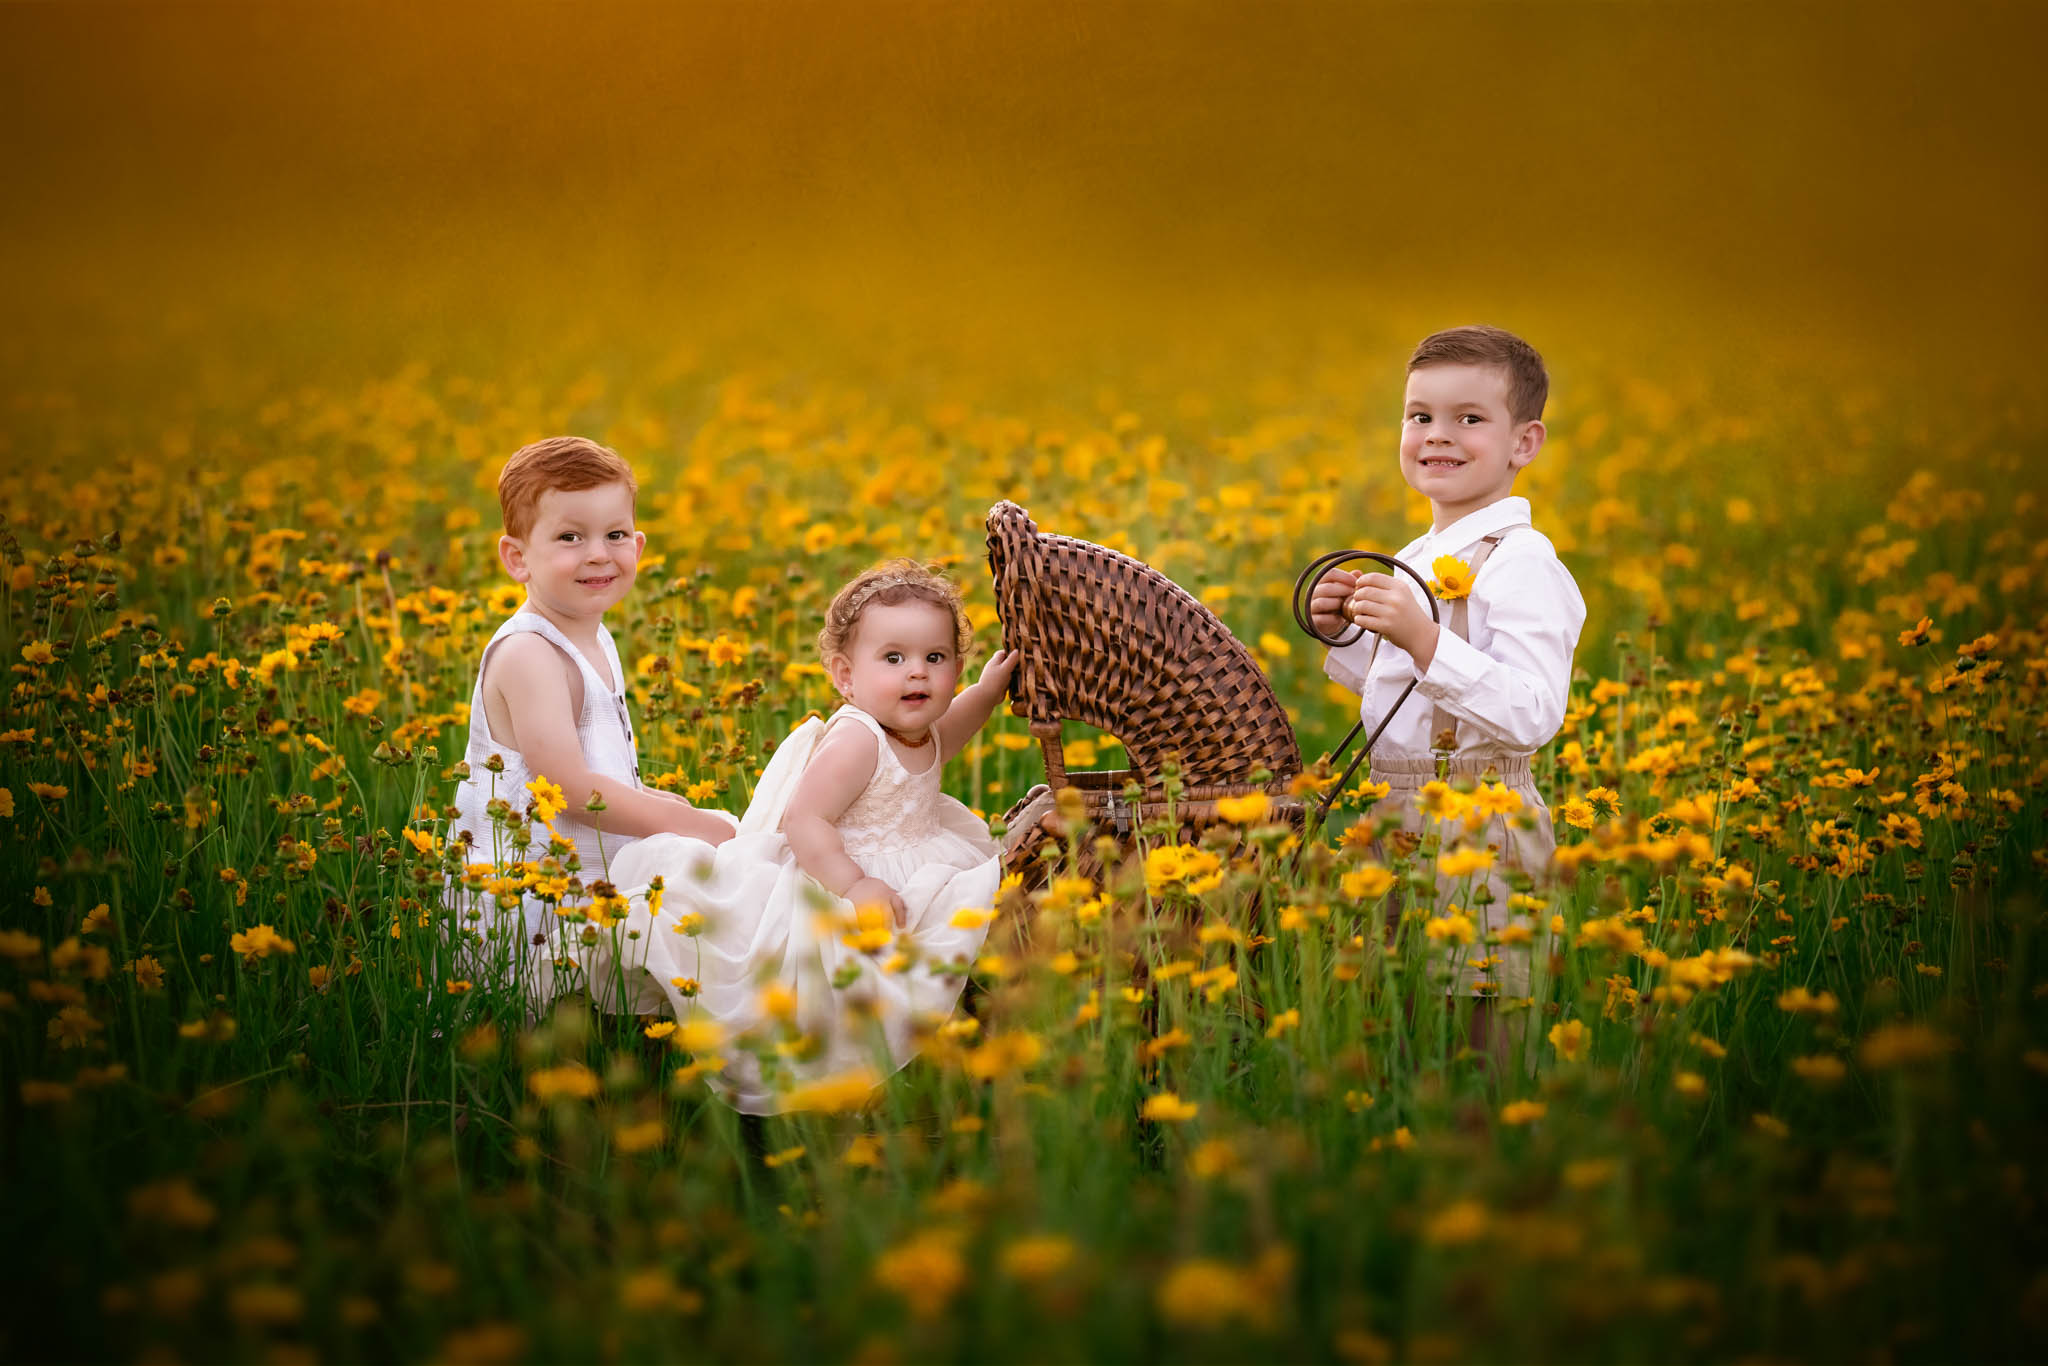 Three siblings play with a wicker baby carriage in a field of yellow flowers raleigh summer camps